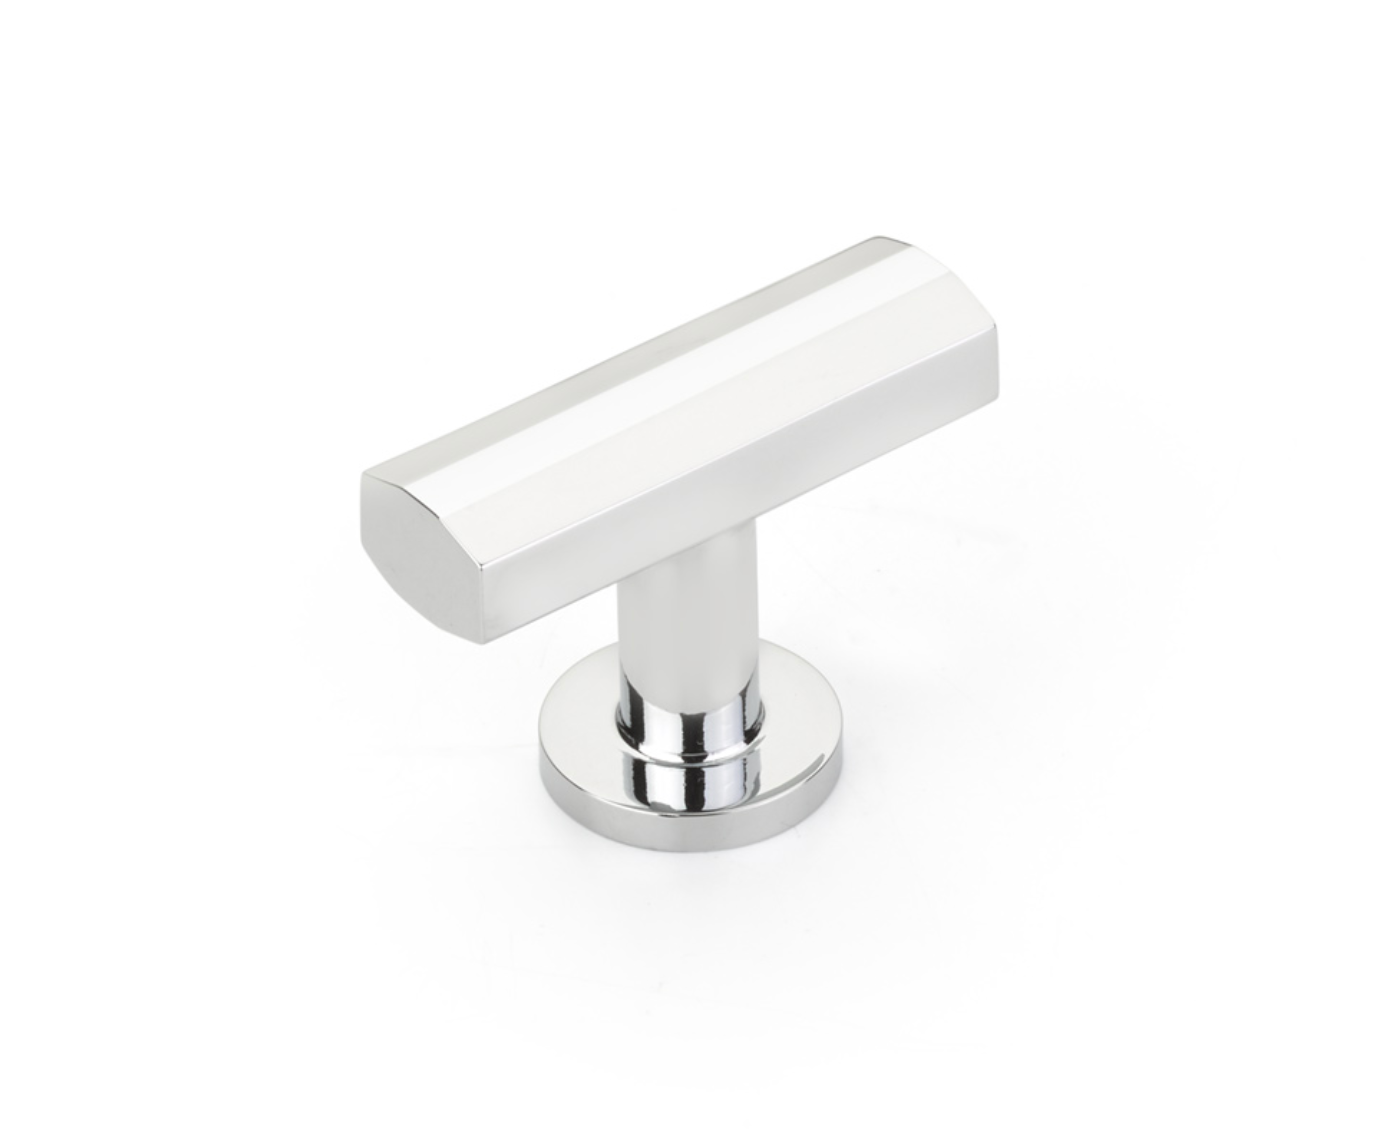 Polished Chrome "Heather" T-Bar Cabinet Knobs and Drawer Pulls - Industry Hardware